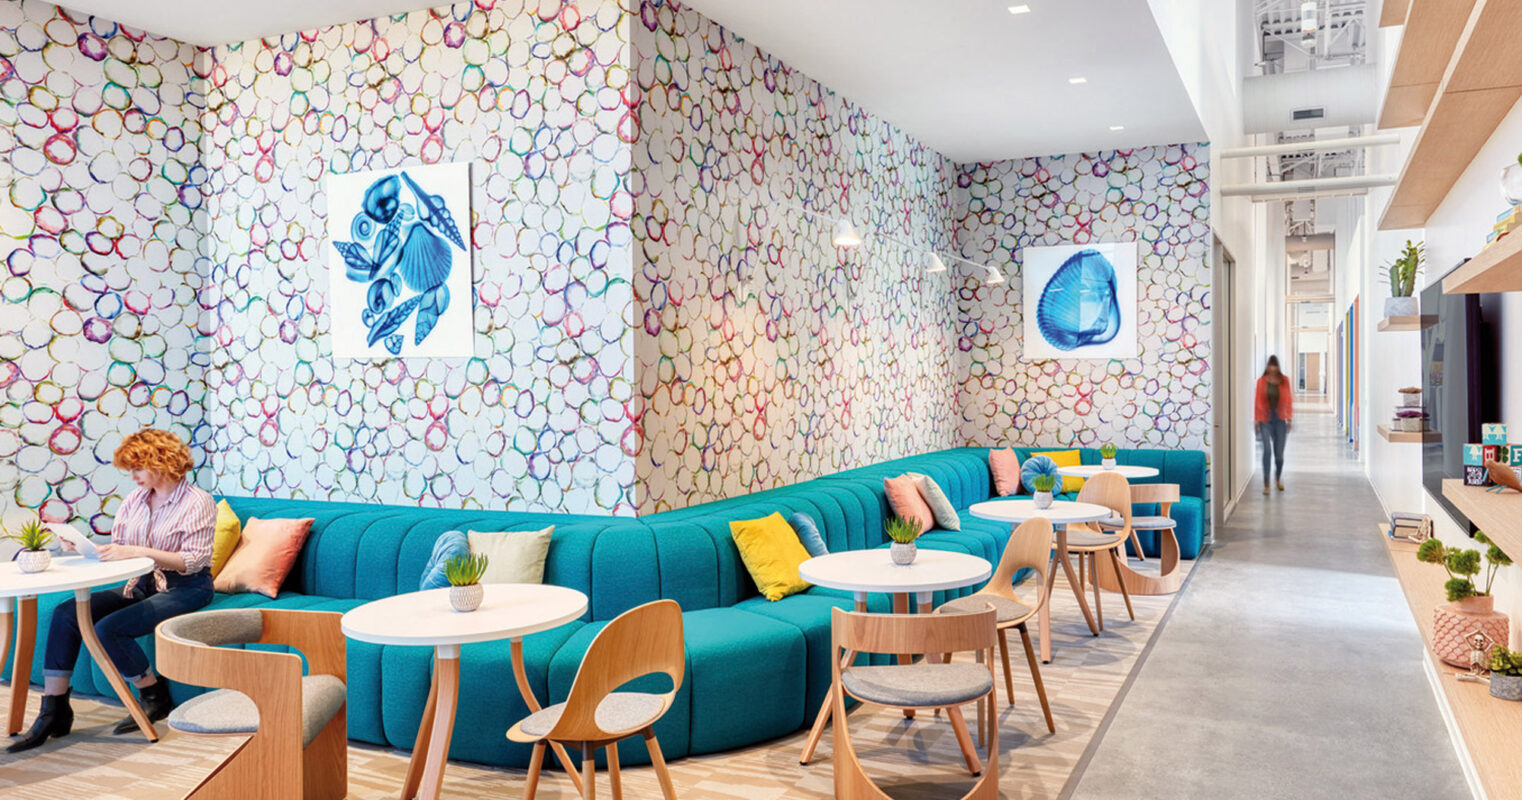 Bright, modern interior featuring a curved turquoise sofa against a vibrant, organically patterned wall. Natural wood accents and simple white tables create a welcoming atmosphere, complemented by whimsical jellyfish art prints. The space is well-lit, emphasizing the playful yet sophisticated design aesthetic.